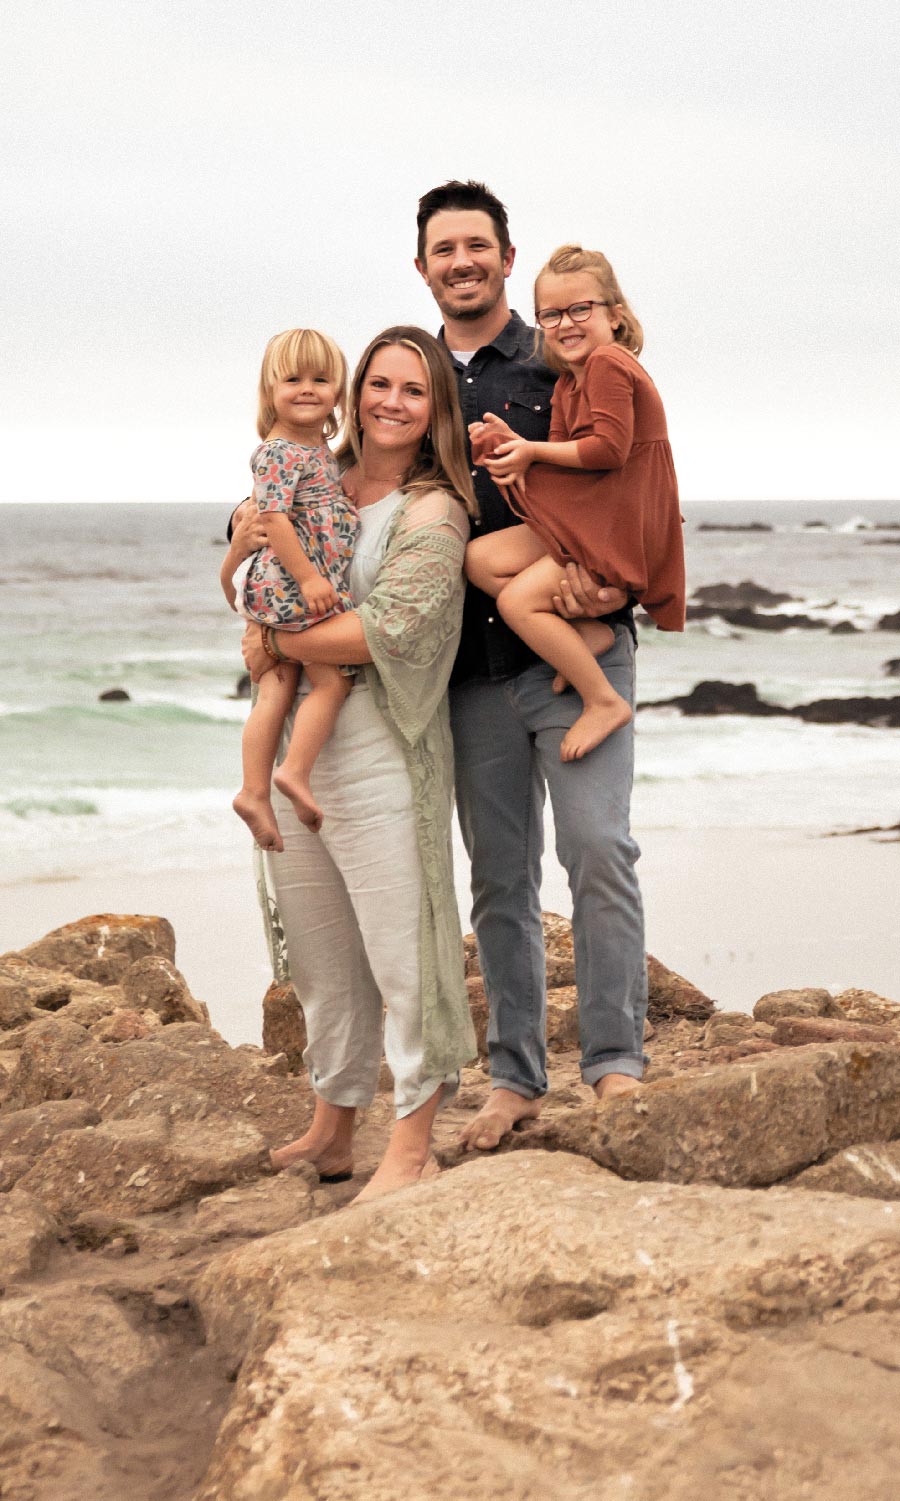 Allie Rowe Ladio, lives in in Monterey, California, with her husband and two daughters